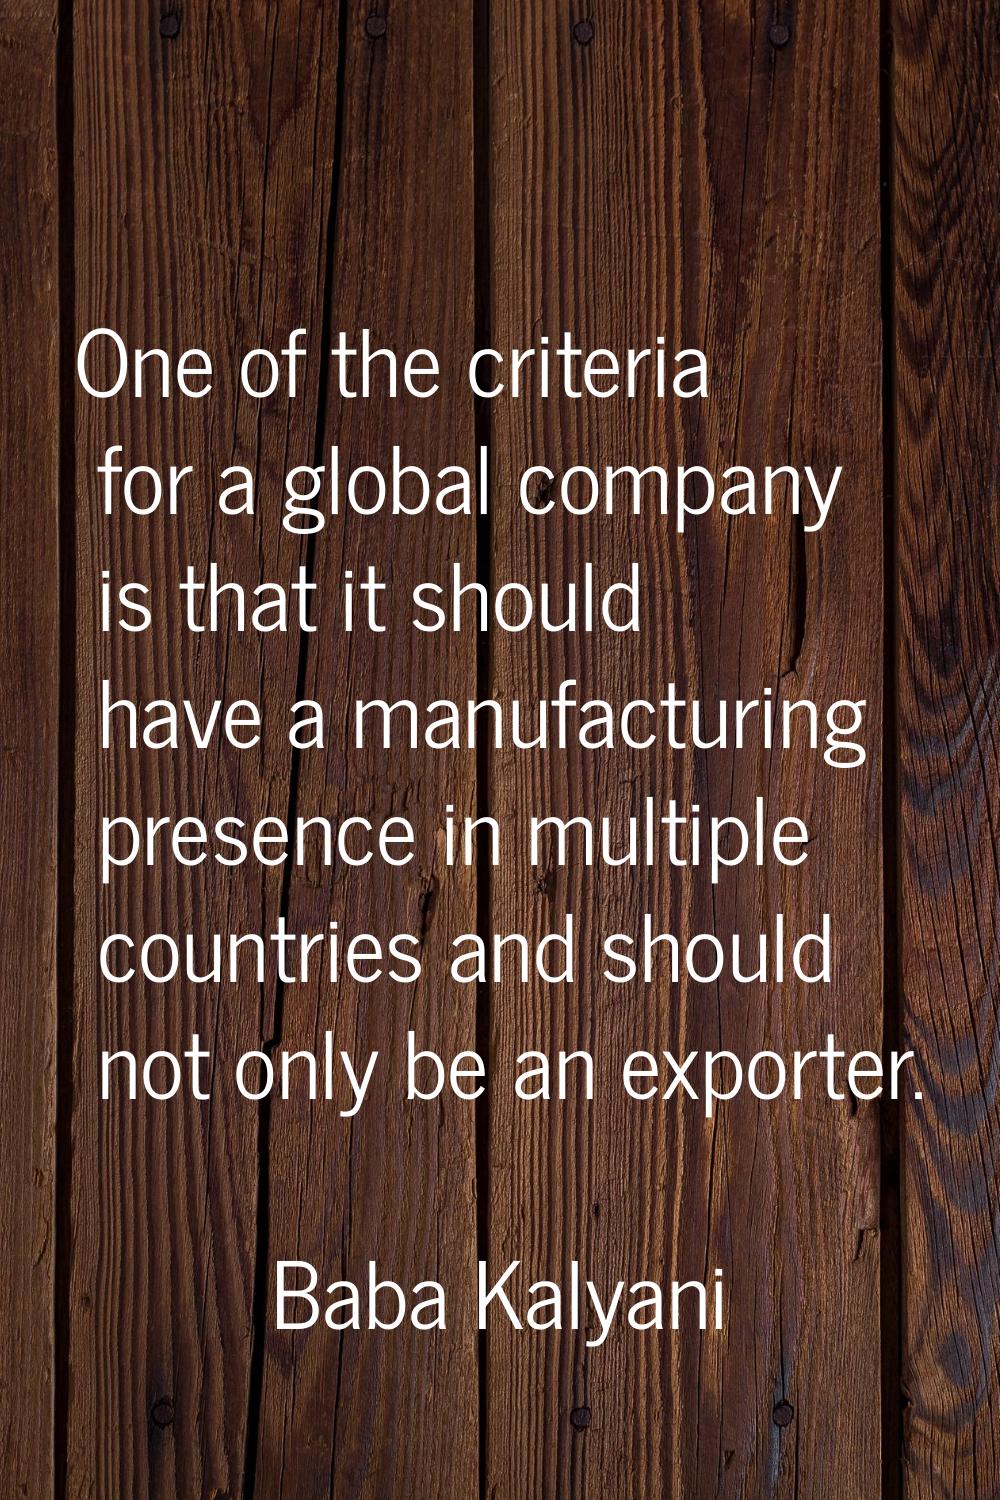 One of the criteria for a global company is that it should have a manufacturing presence in multipl